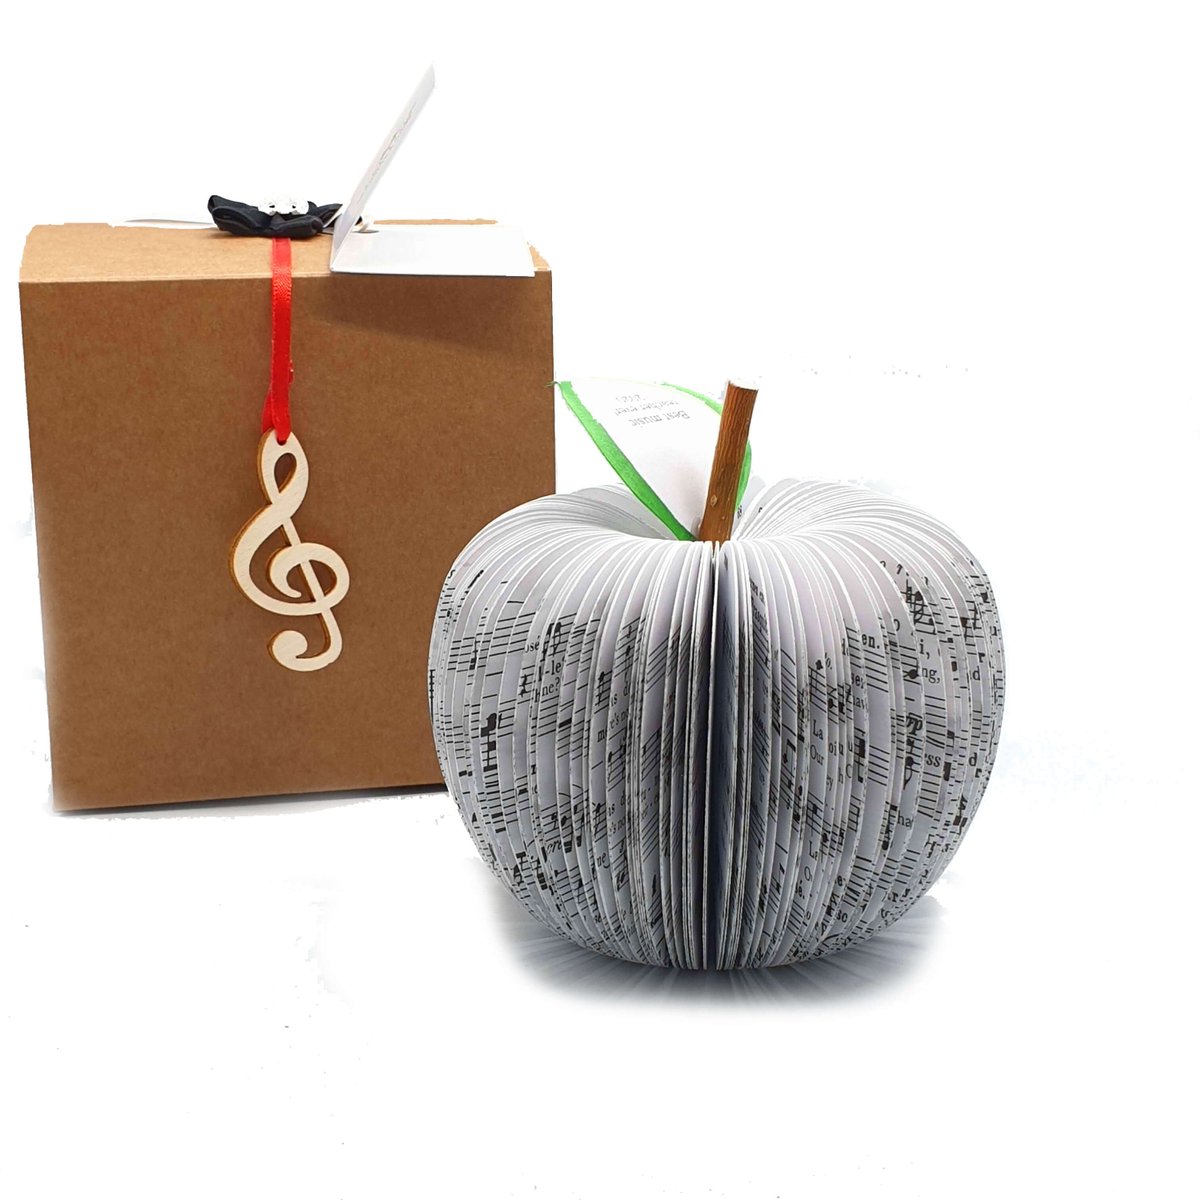 Music gift - Musical gift - Music teacher gift - Gift for Musician - Music sheet apple - Music score gift - Music apple Gift creatoncrafts.etsy.com/listing/538551… #CreatonCrafts #MHHSBD #Handmade #WomaninBiz #EpiconEtsy #MusicGifts